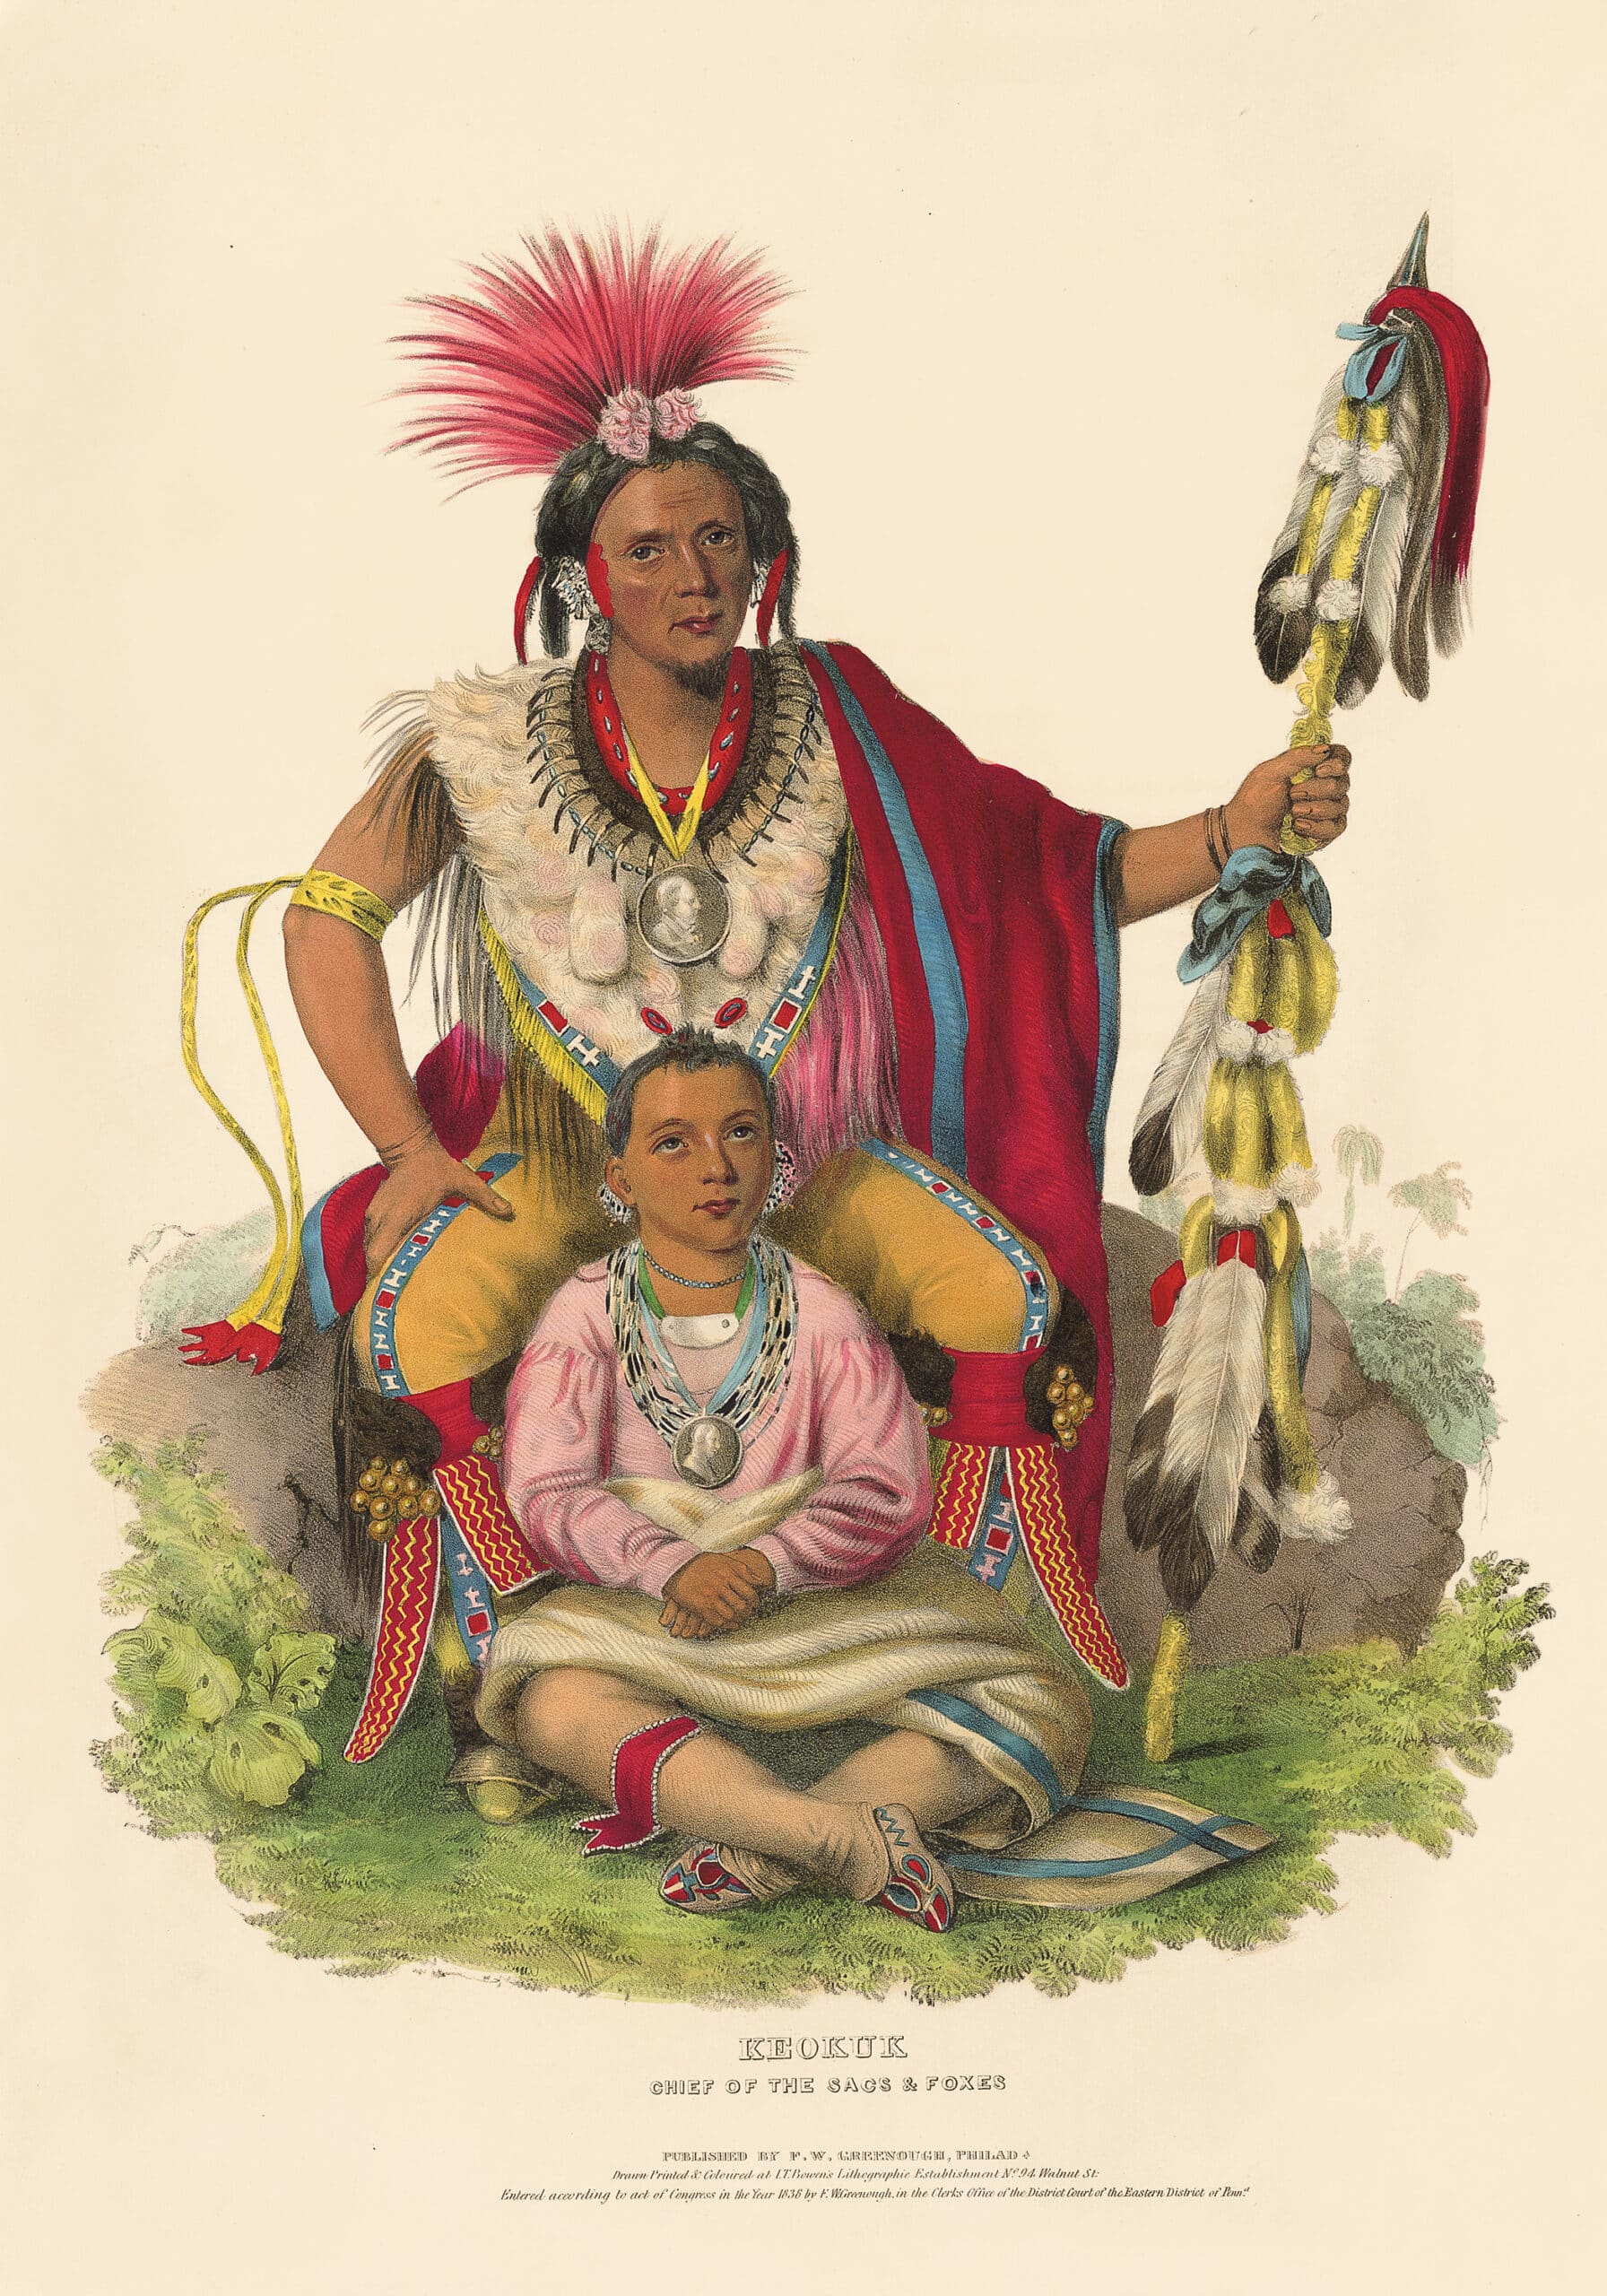 McKenney and Hall Pl. 59, Keokuk, Chief of the Sacs & Foxes